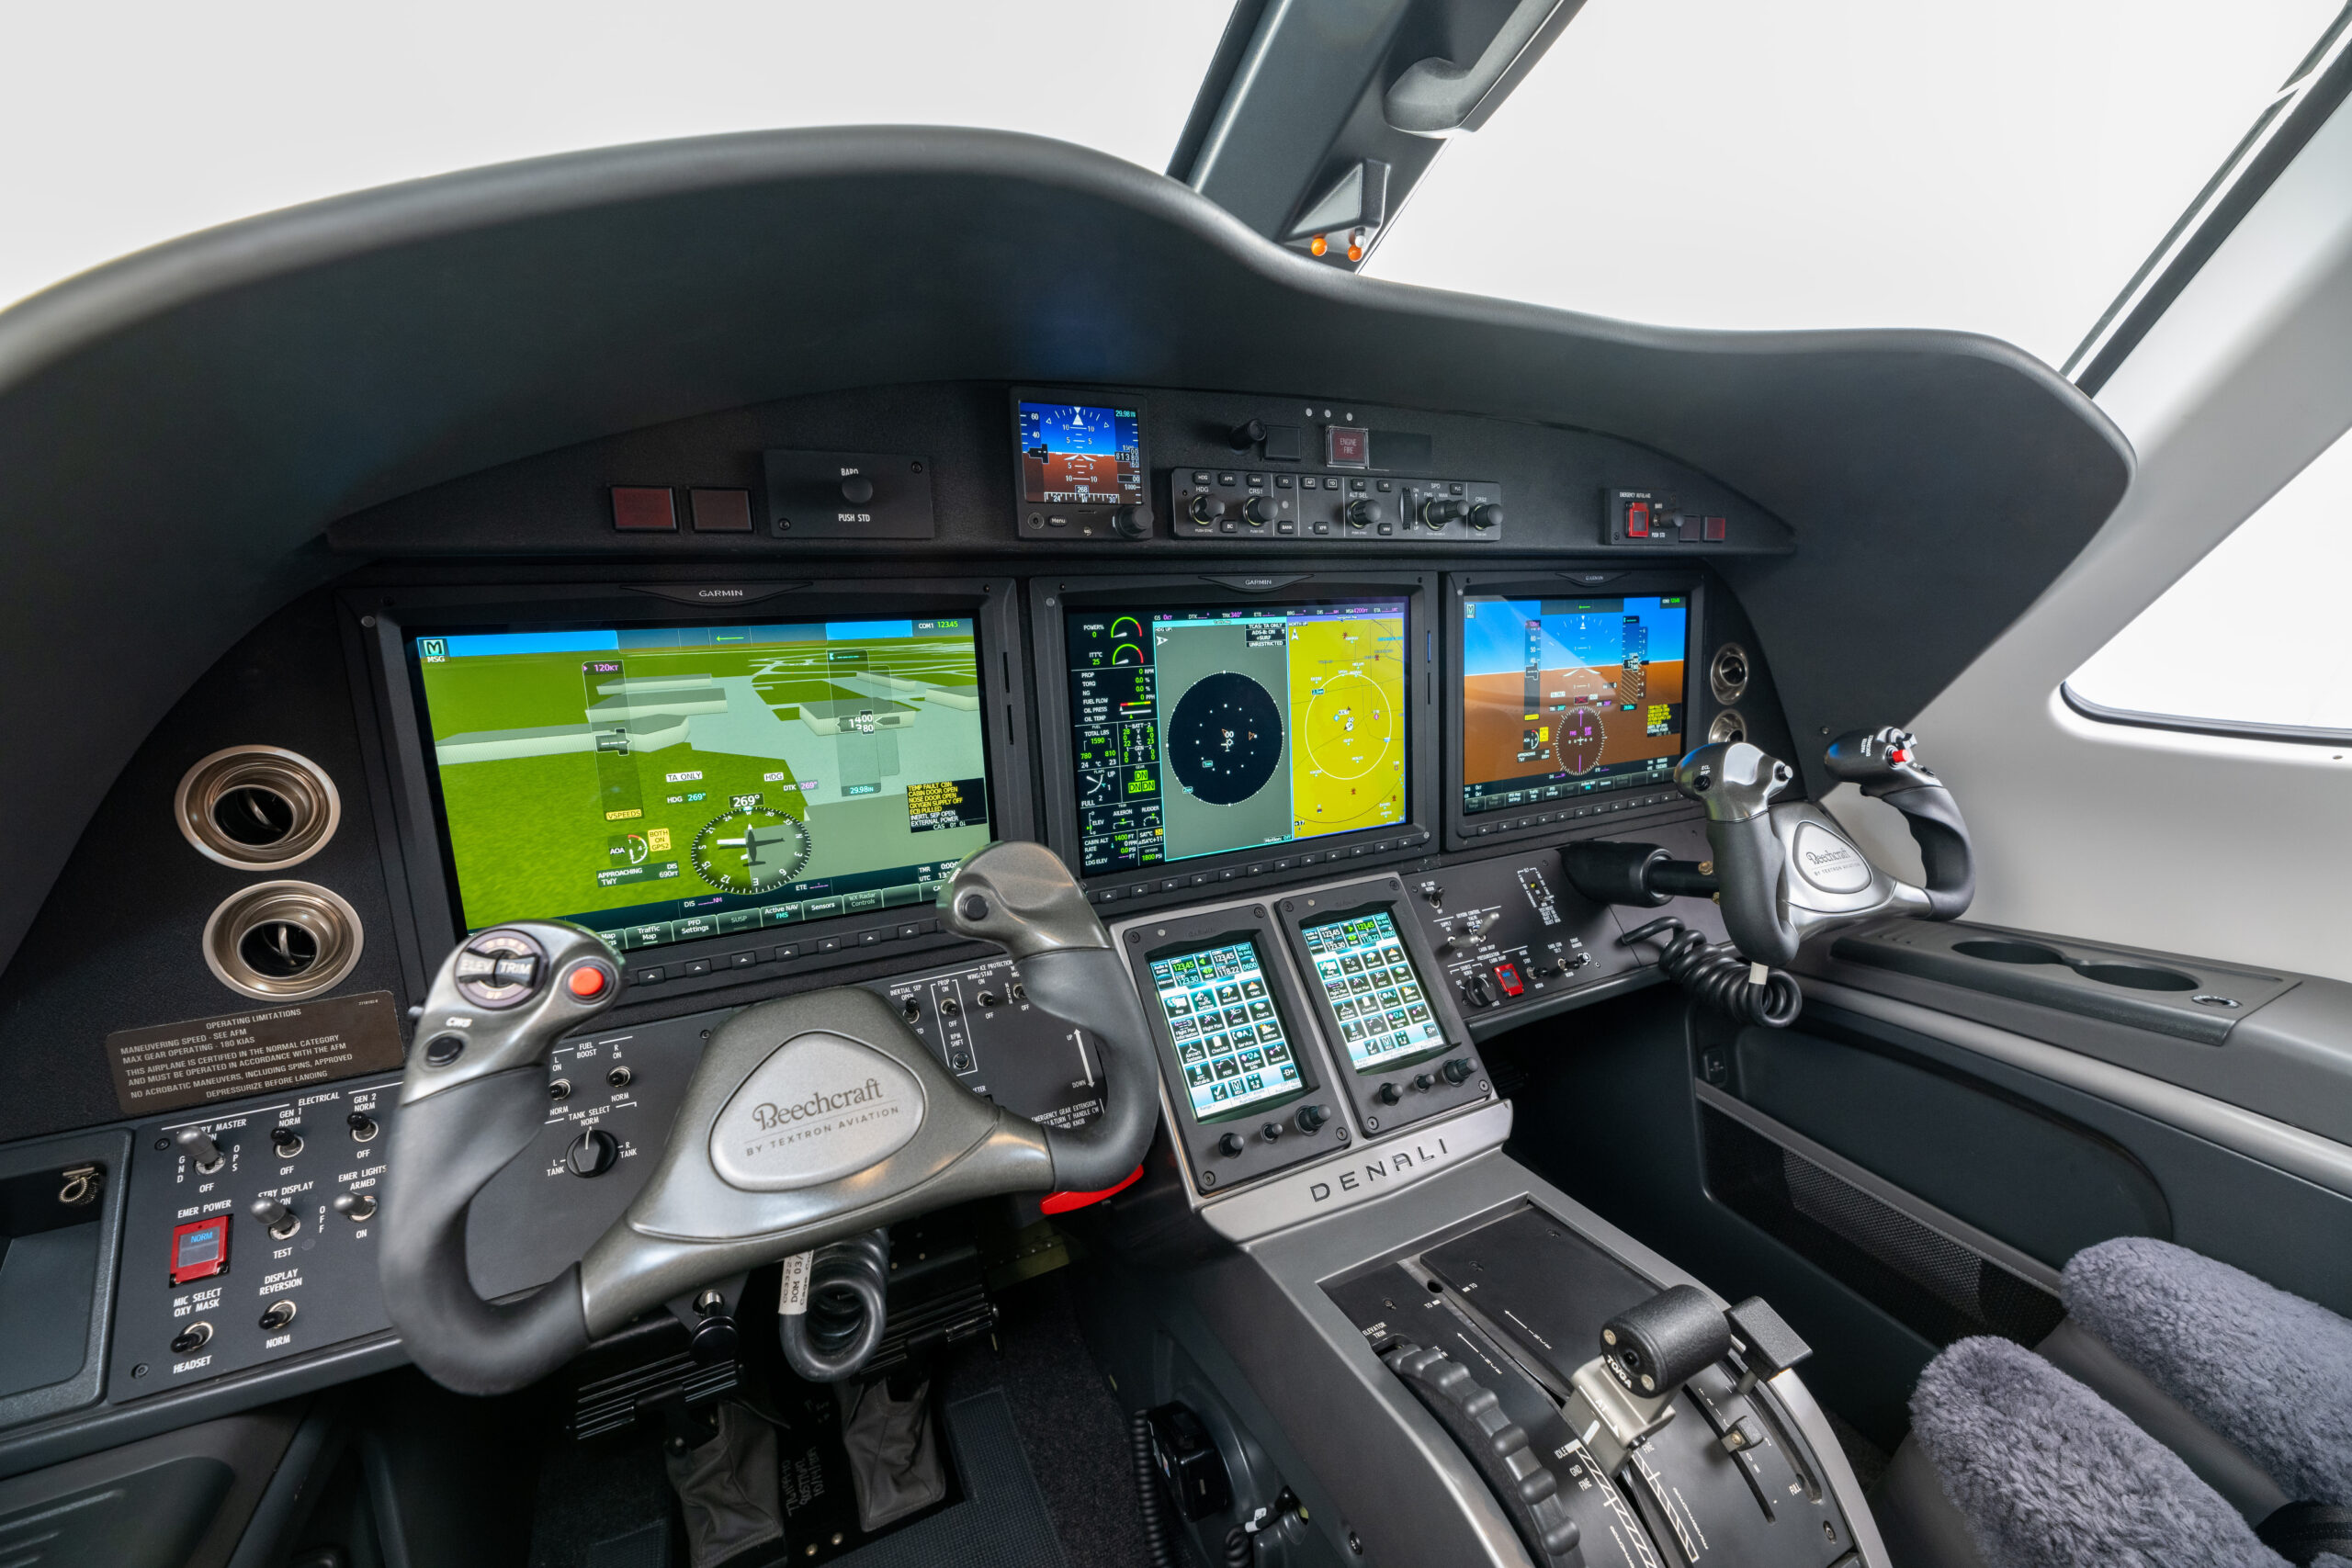 Textron Aviation brings peace-of-mind technology to the Beechcraft Denali cockpit